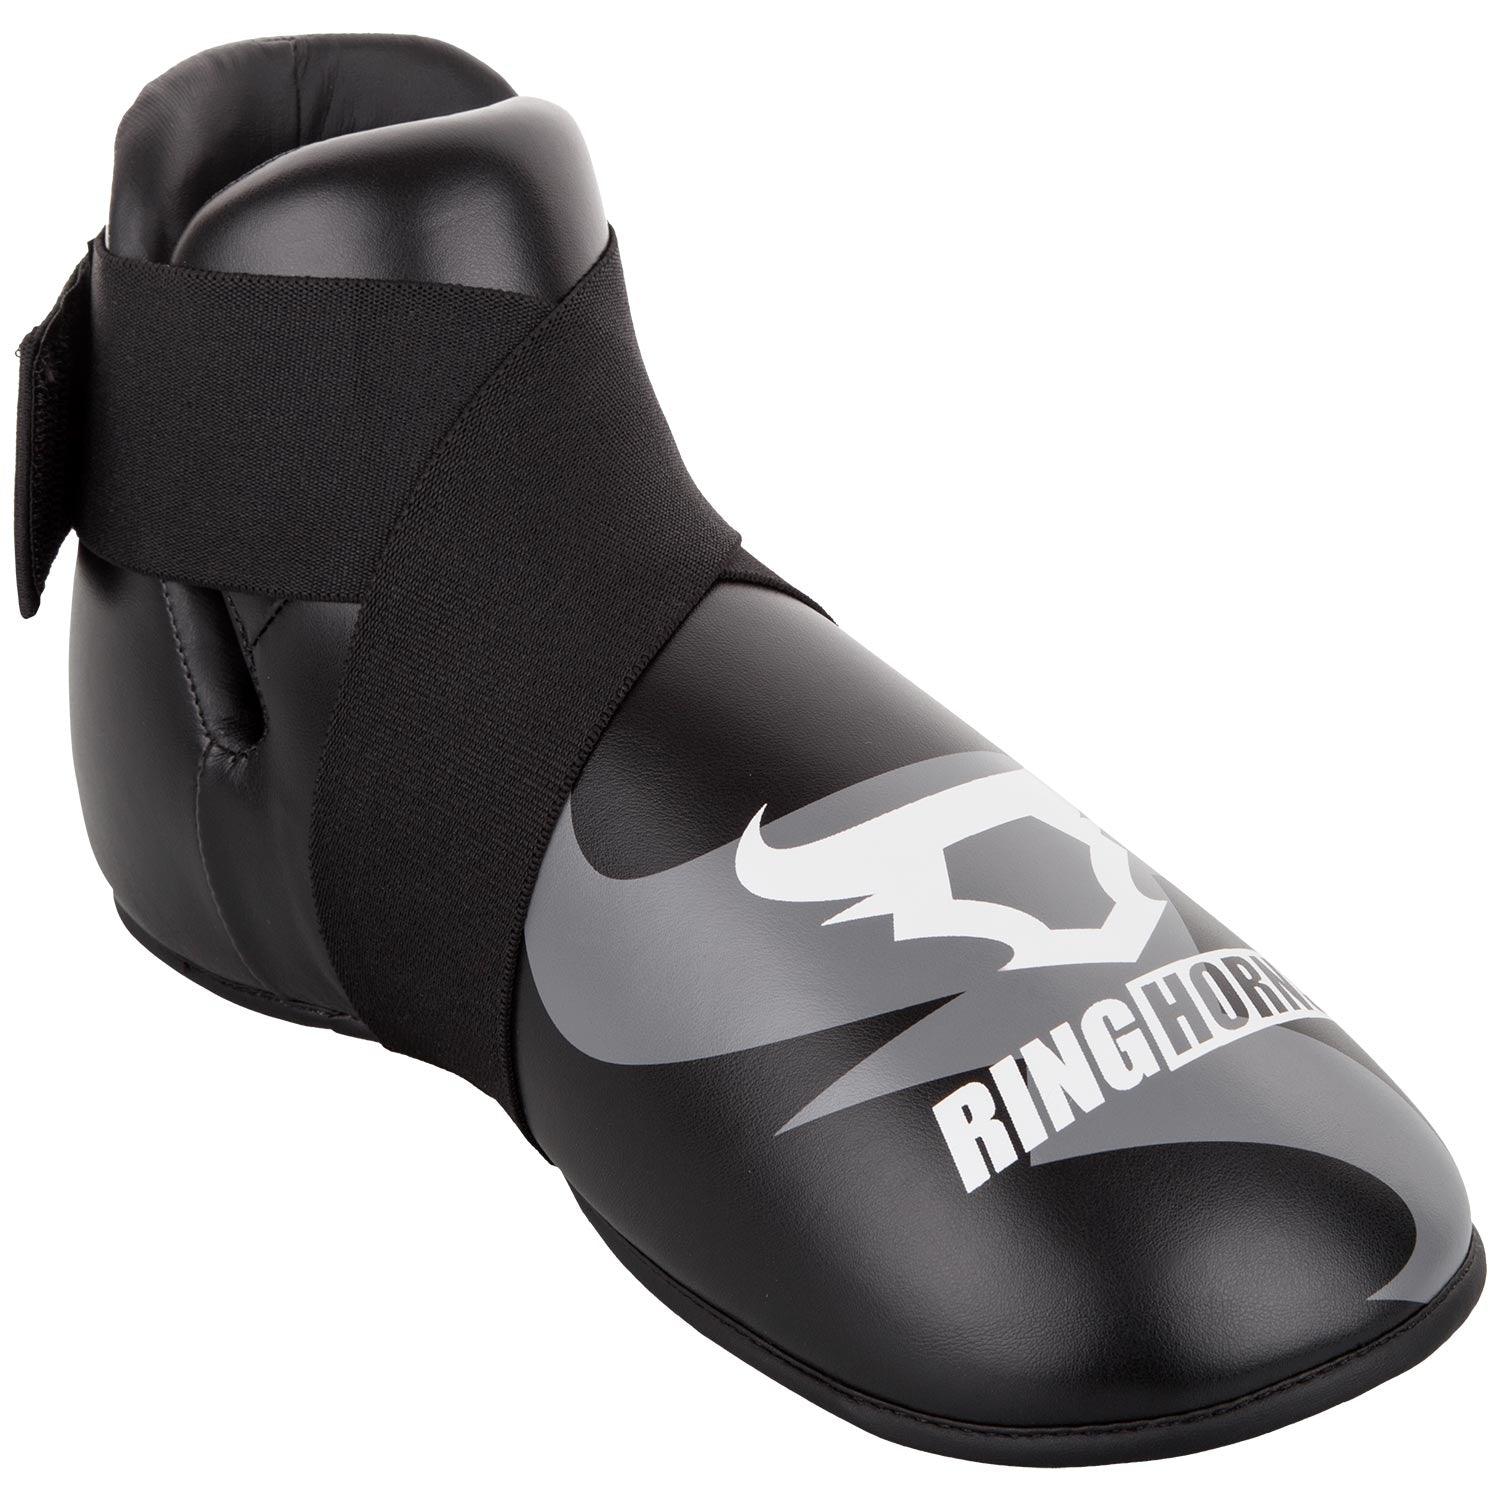 Ringhorns Charger Footwear - Black Picture 2